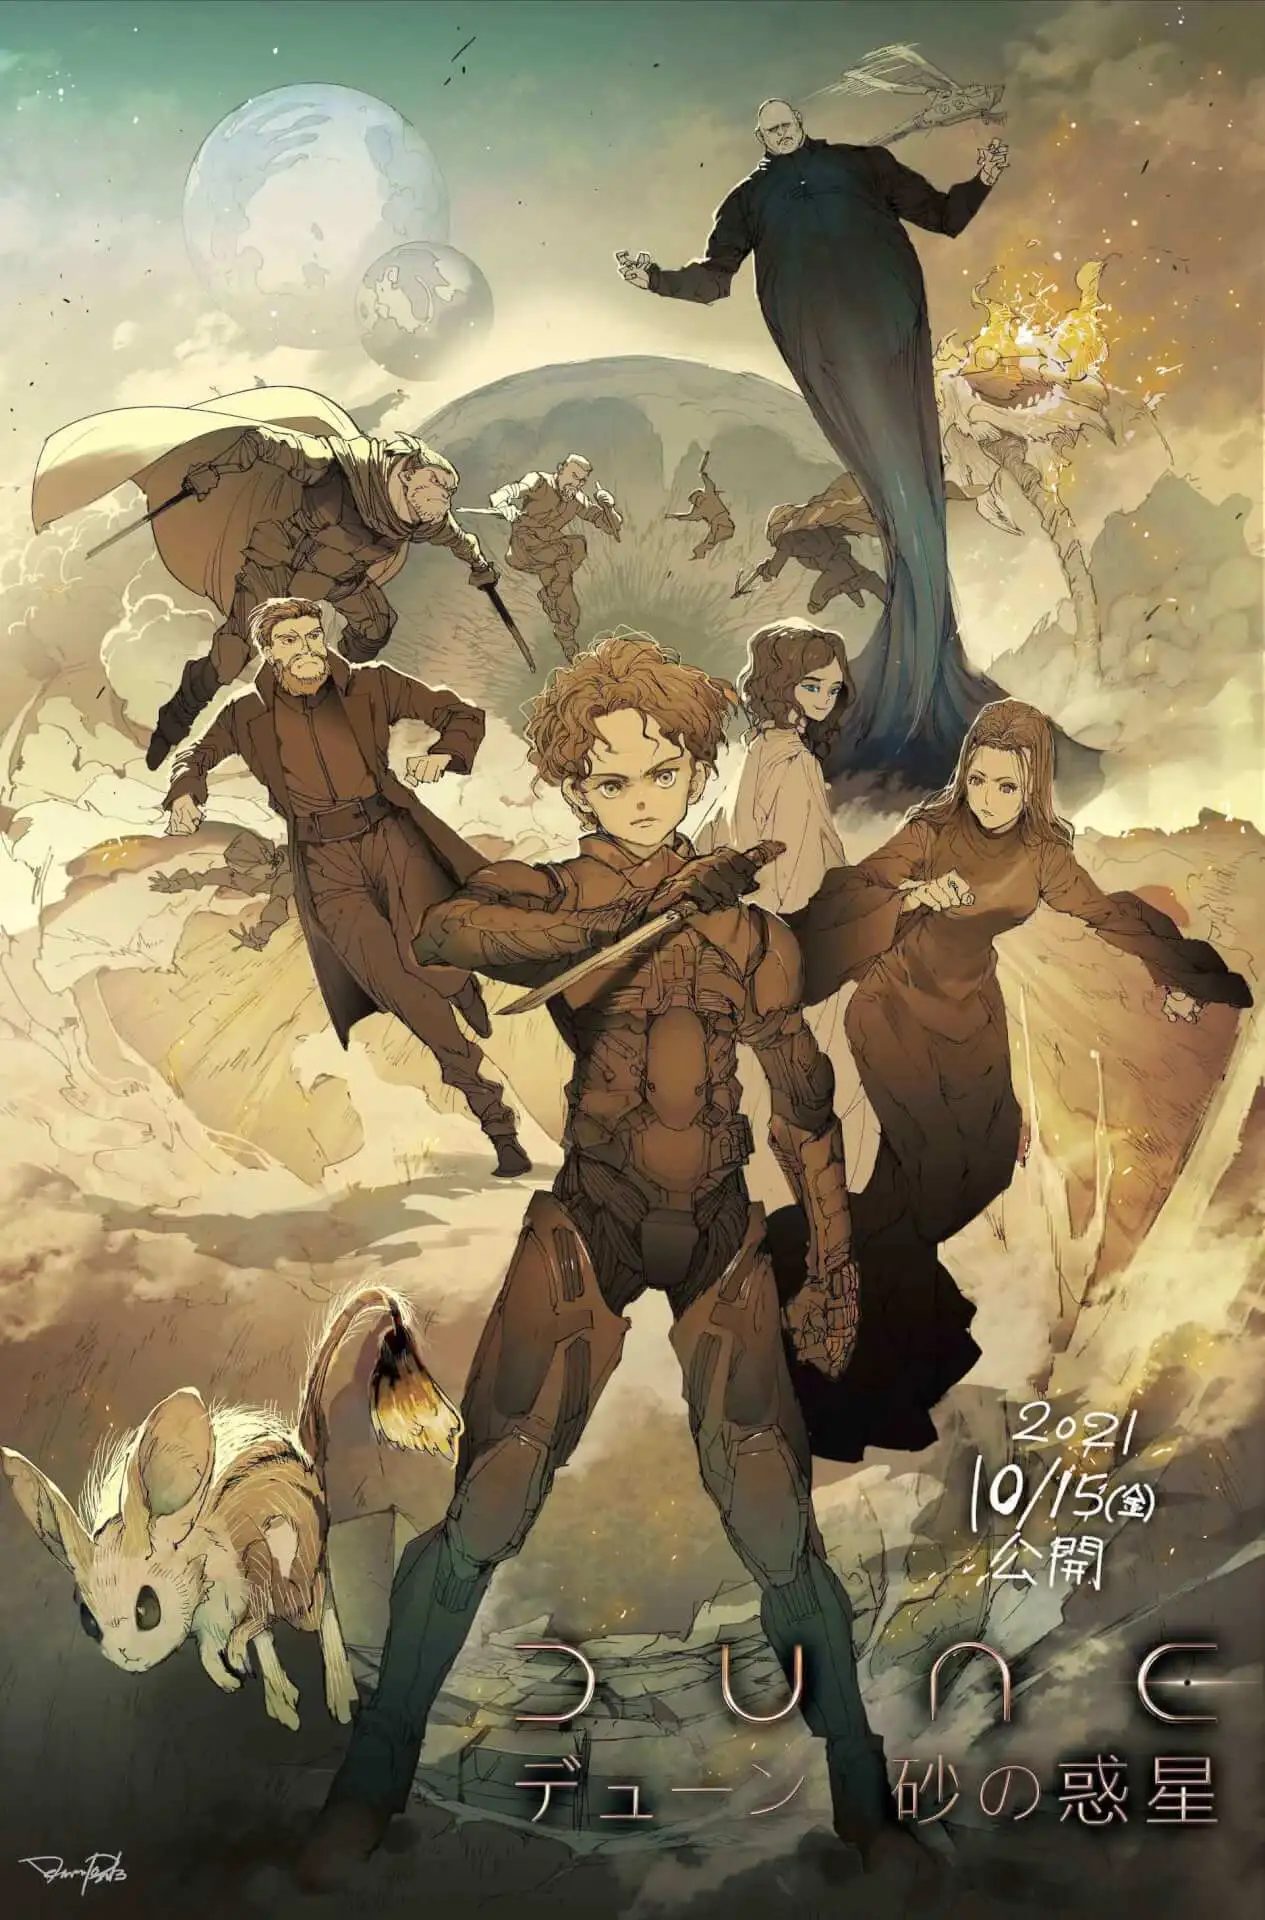 dune poster the promised neverland